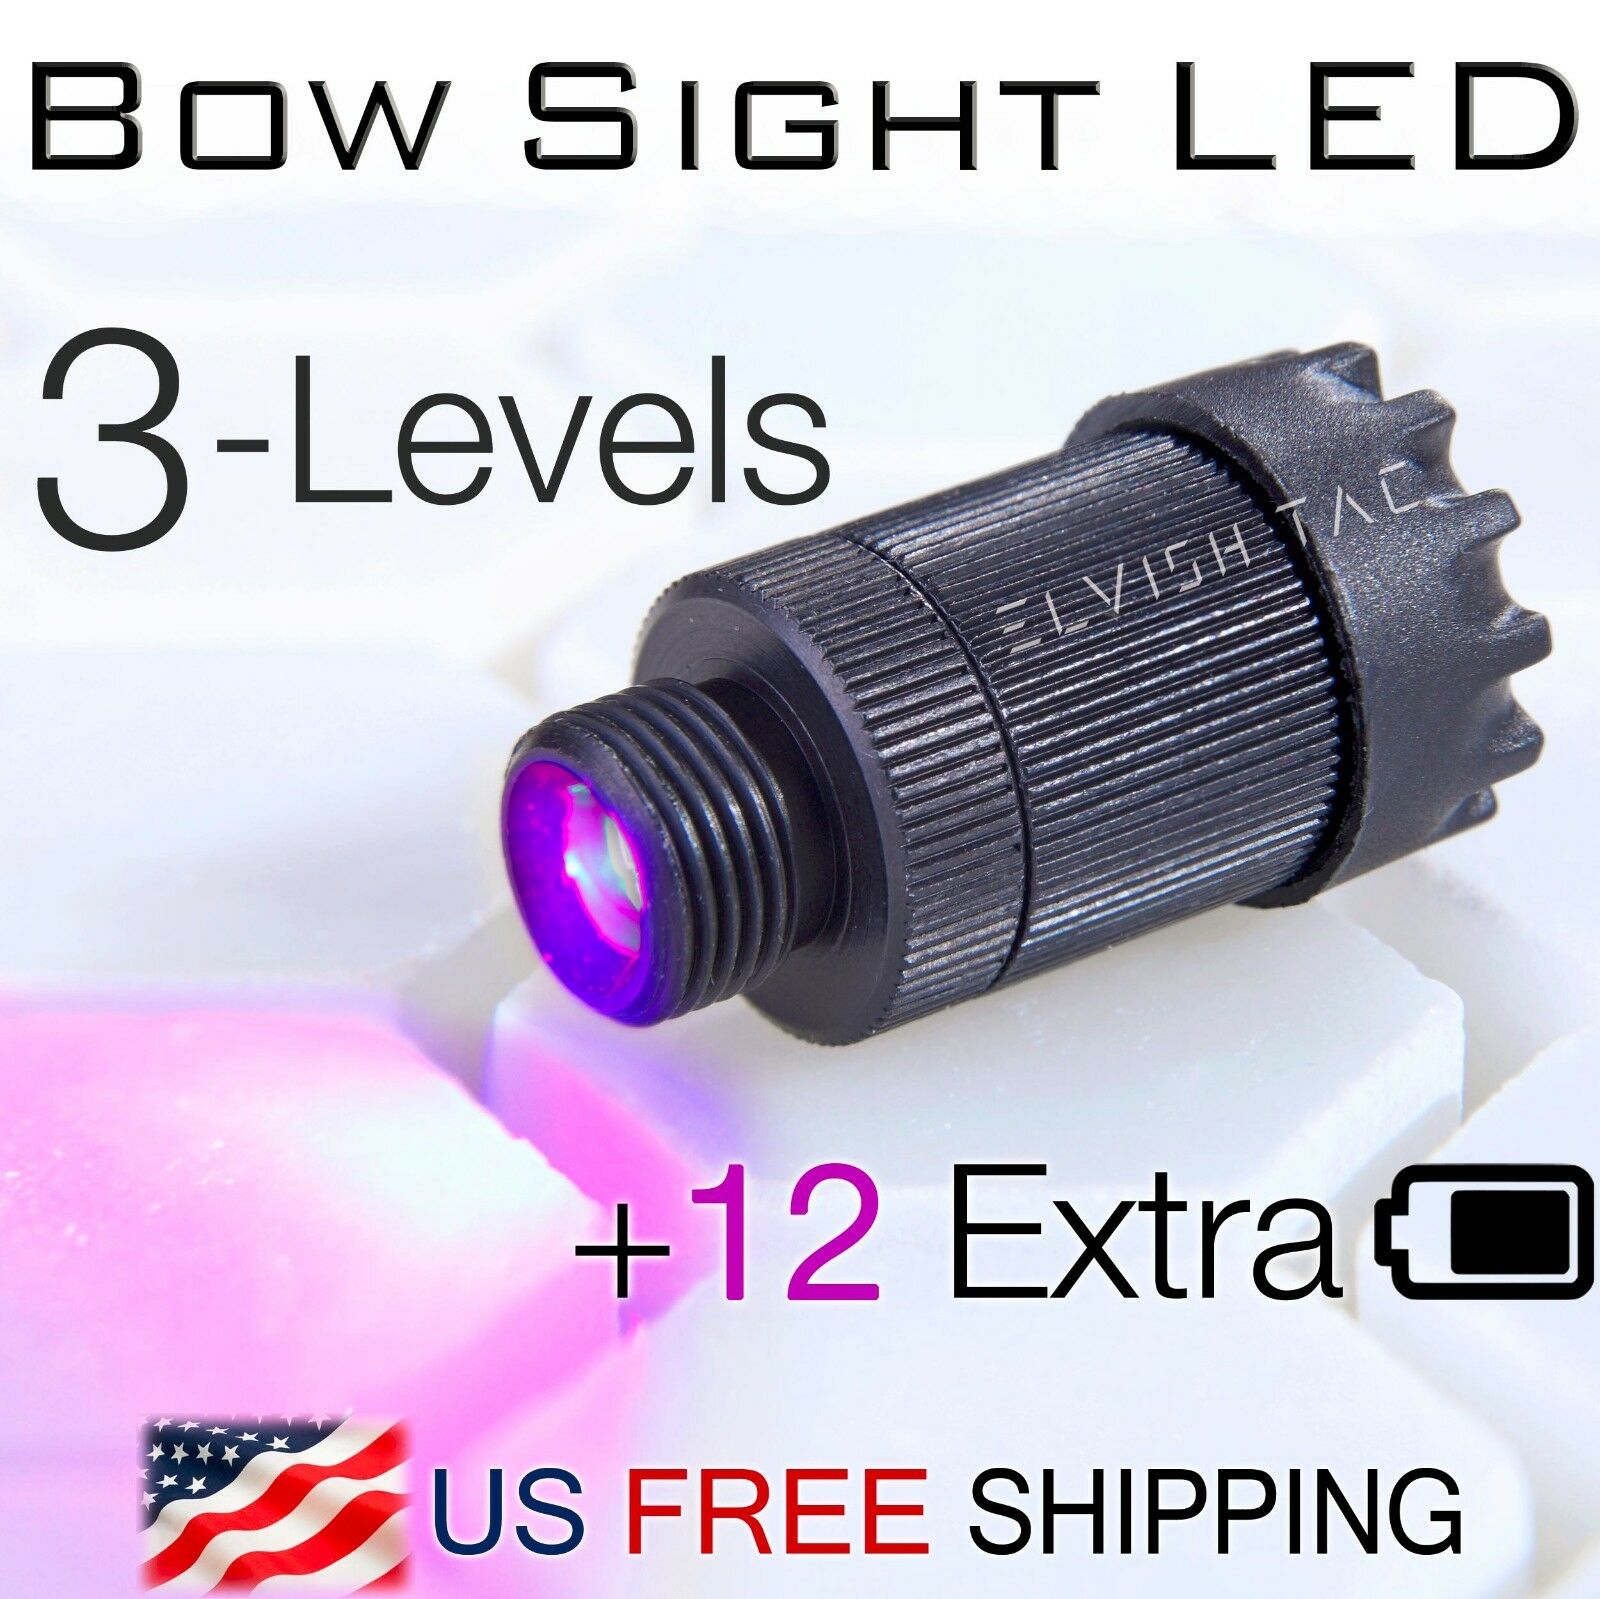 Compound Bow Sight Light Led 3-levels Adjustable 3/8-32 Thread 12 Extra Battery